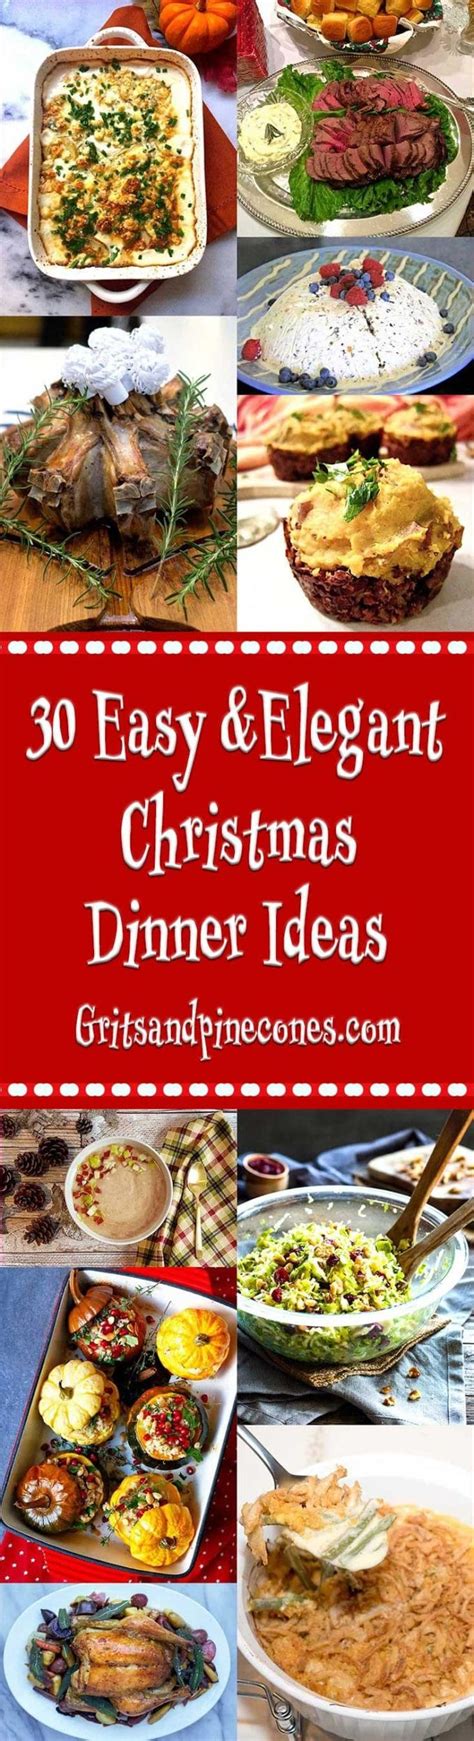 Simple table decorations and ideas for using leftovers for an easy breakfast! 30 Elegant Christmas Dinner Menu Ideas | Grits and Pinecones